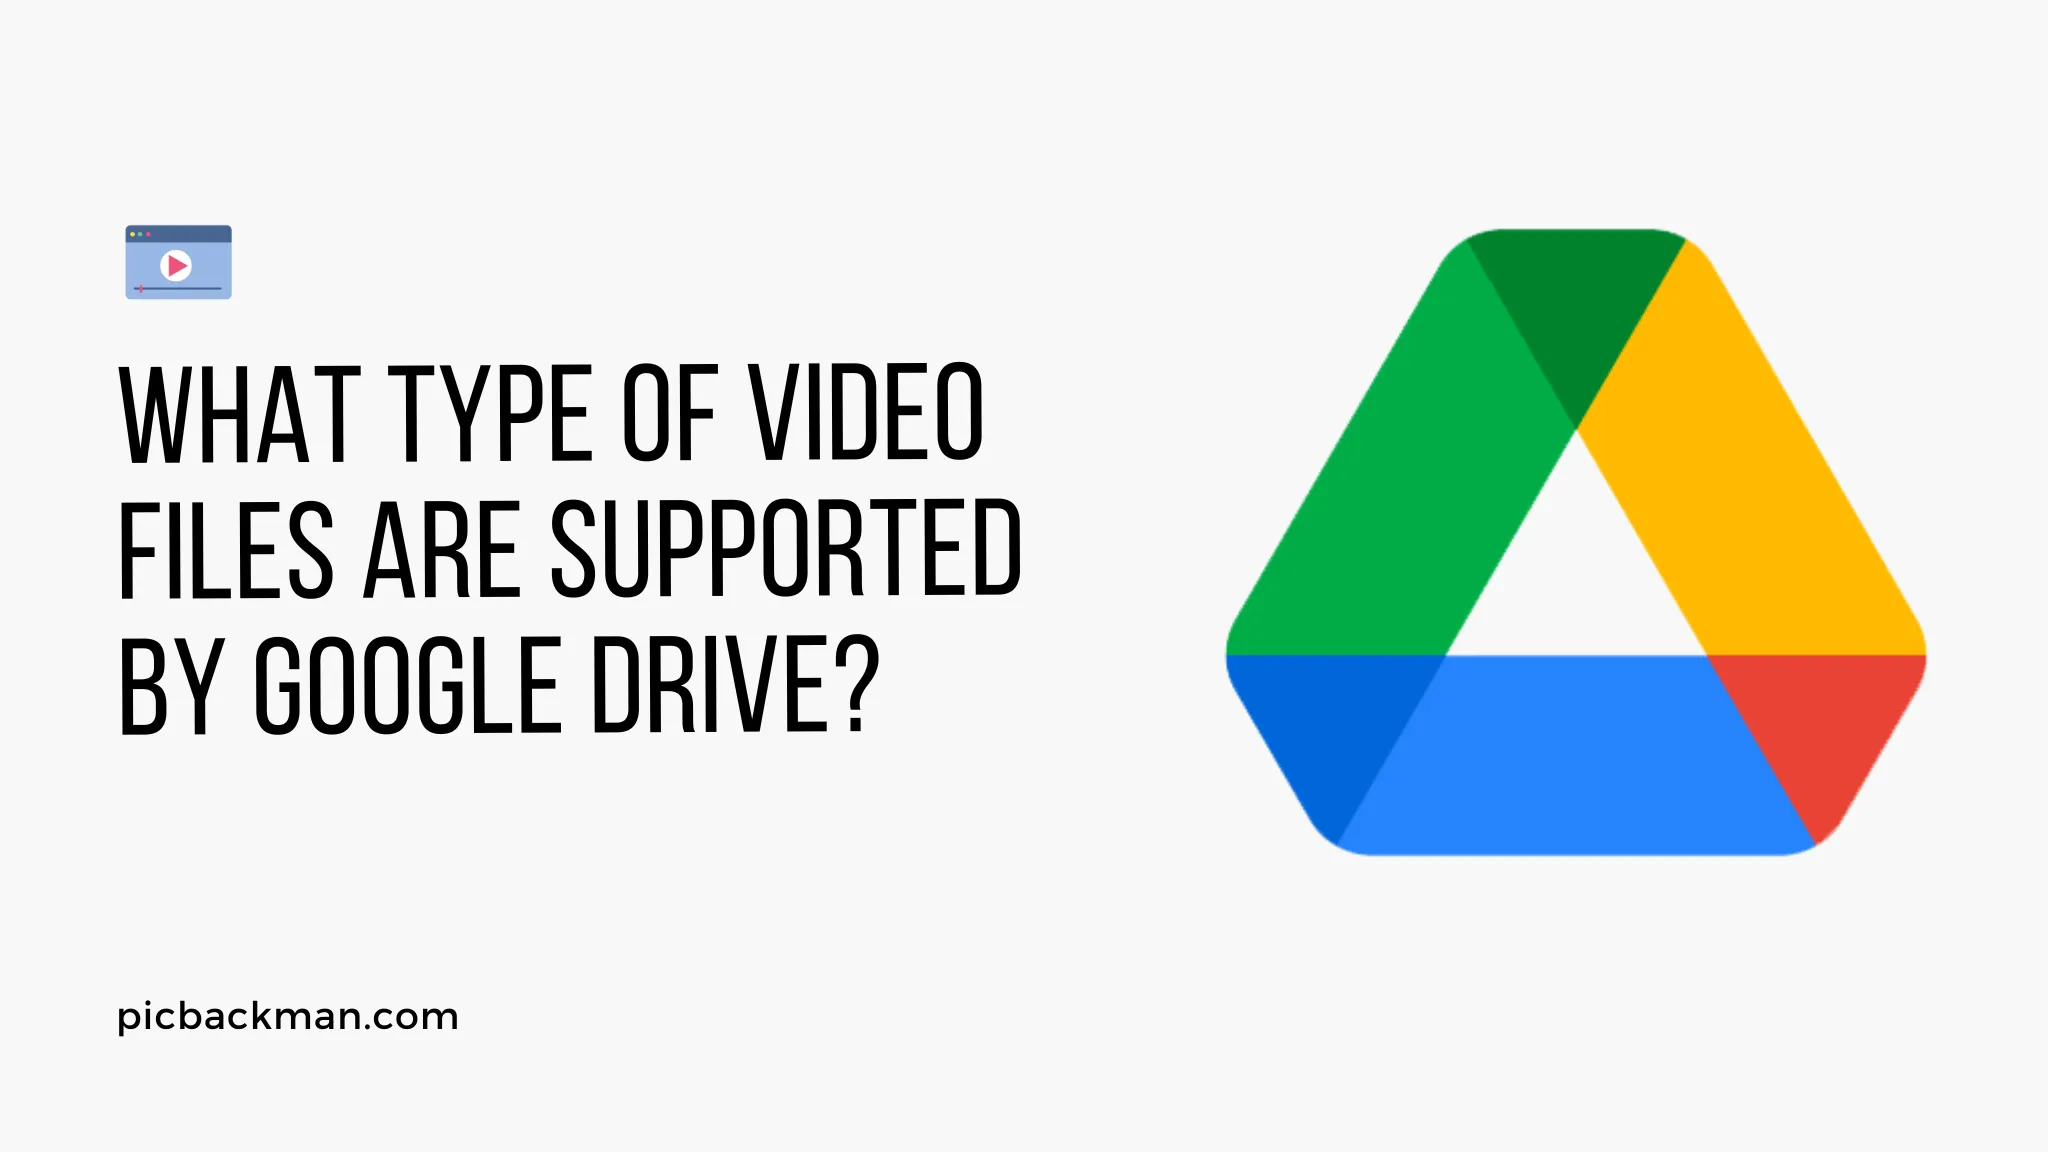 What type of video files are supported by Google Drive